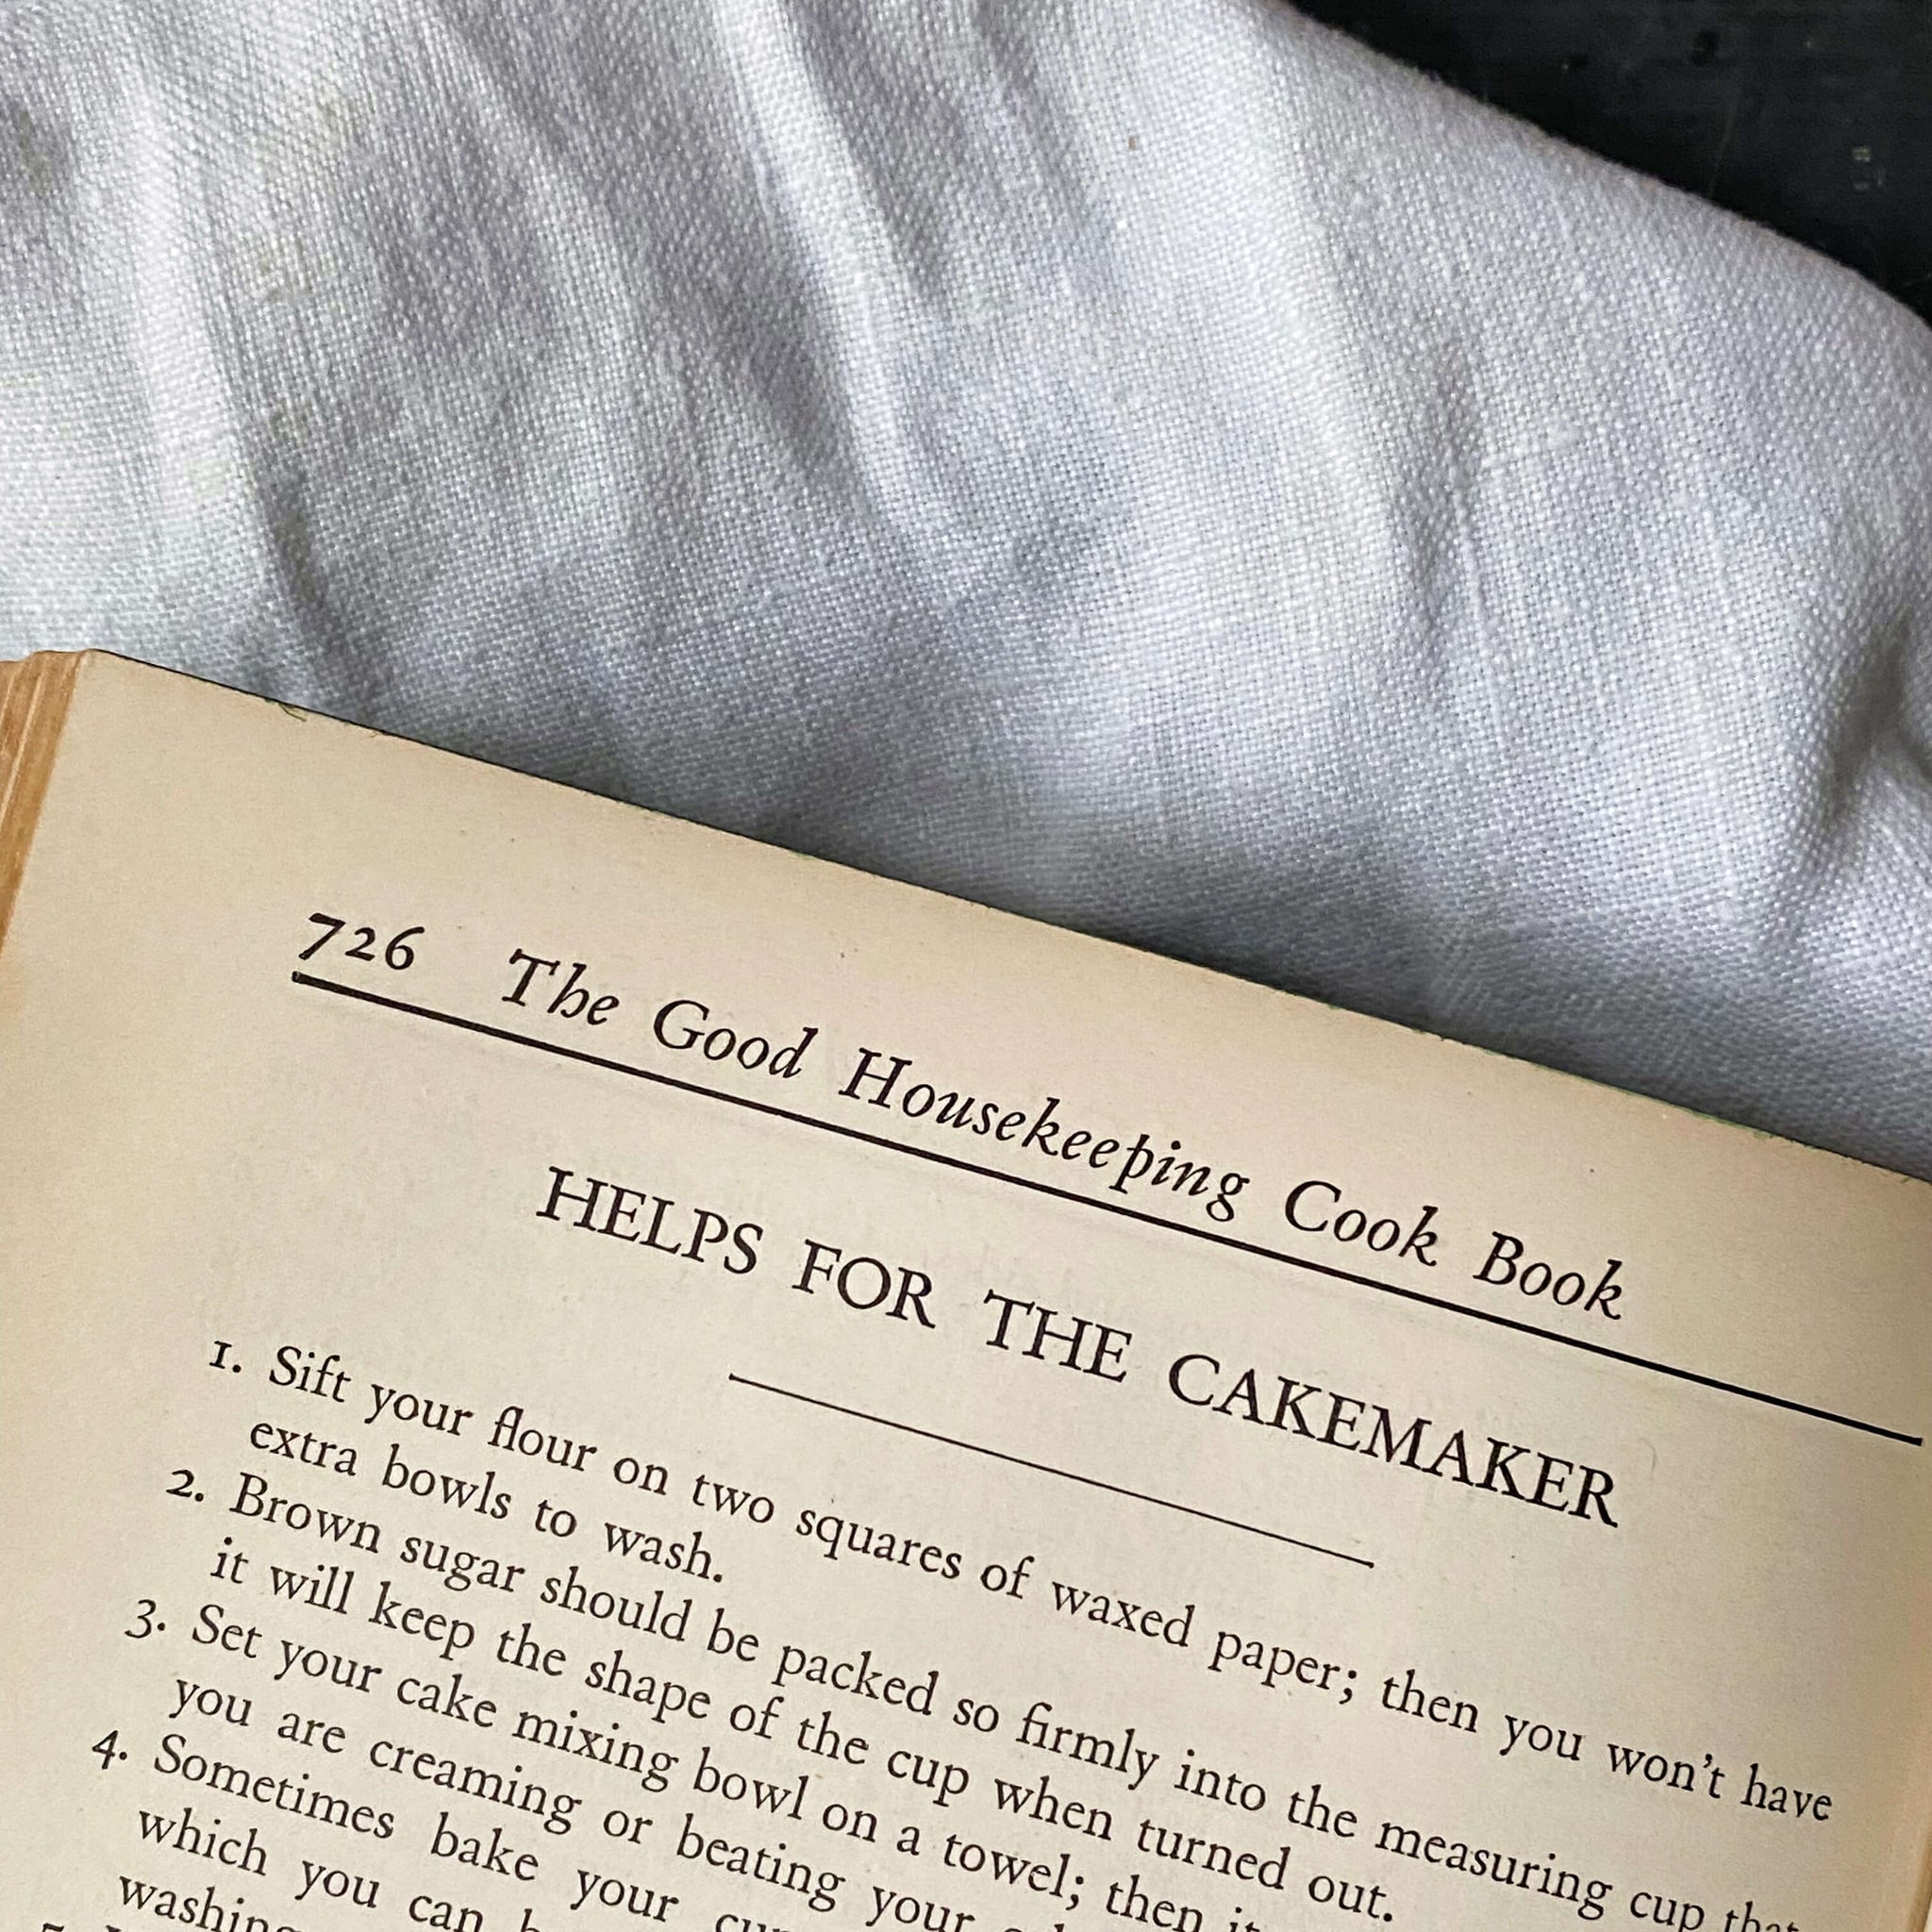 The Good Housekeeping Cook Book -1943 Wartime Edition with Handwritten Recipes - Reserved for Jolie B.